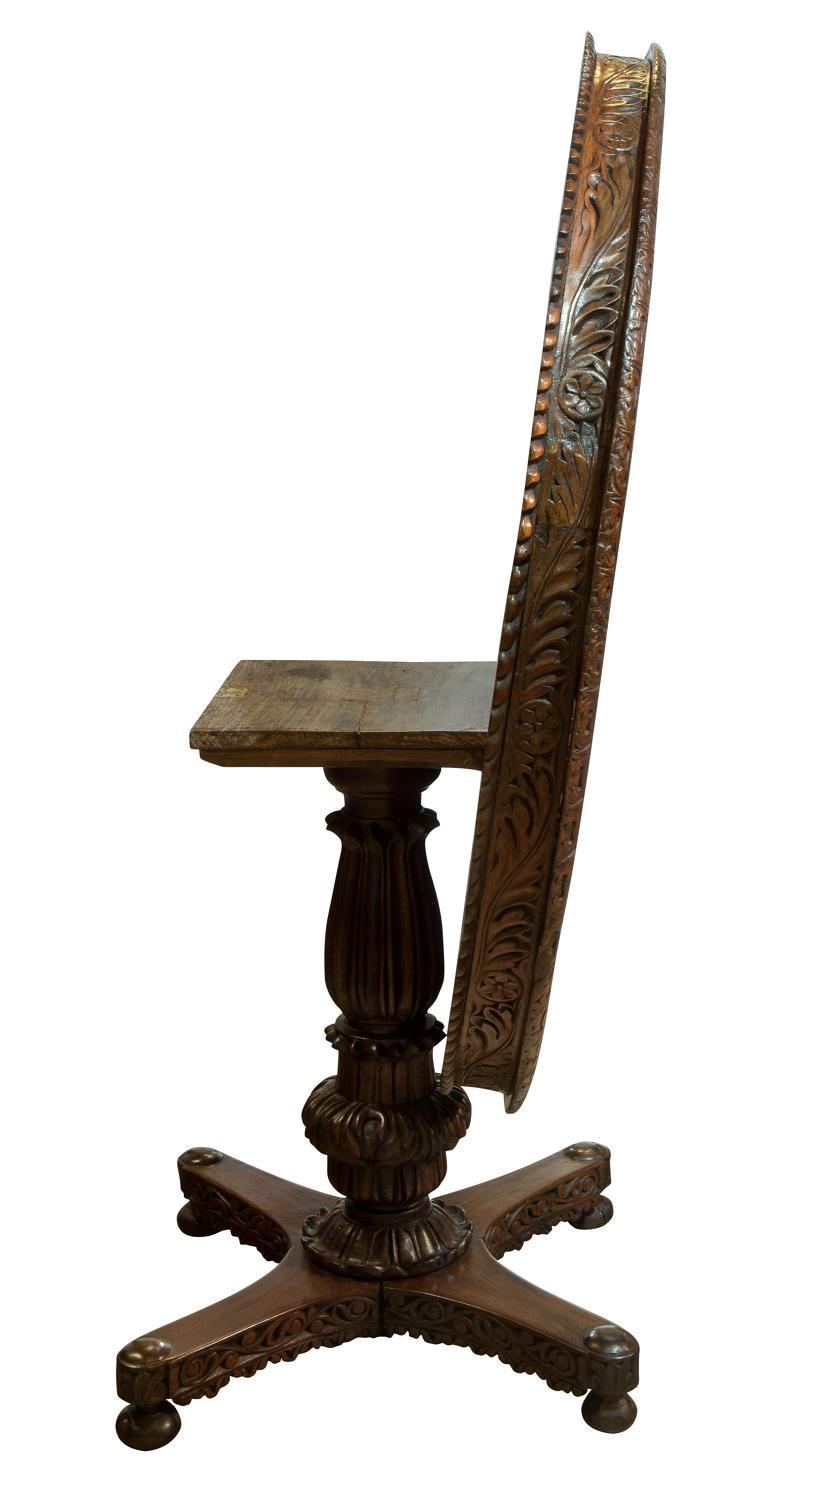 An Anglo Indian padauk wood centre table with carved frieze to tip-up top and base,

circa 1880.